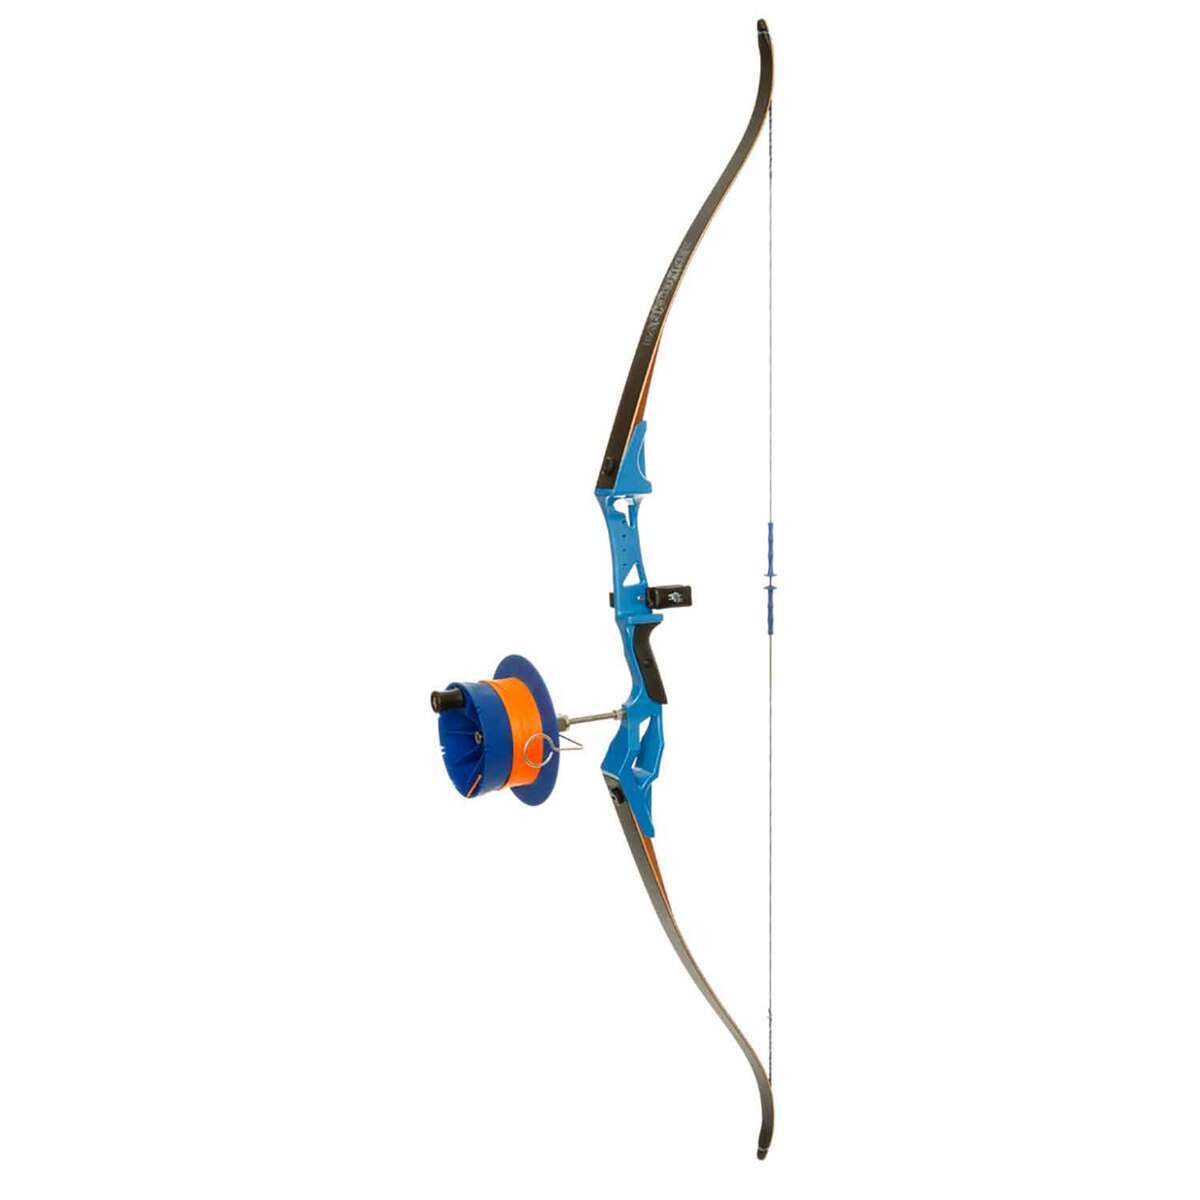 PSE Kingfisher Camo Bowfishing Recurve Bow Only Right Handed 40lbs